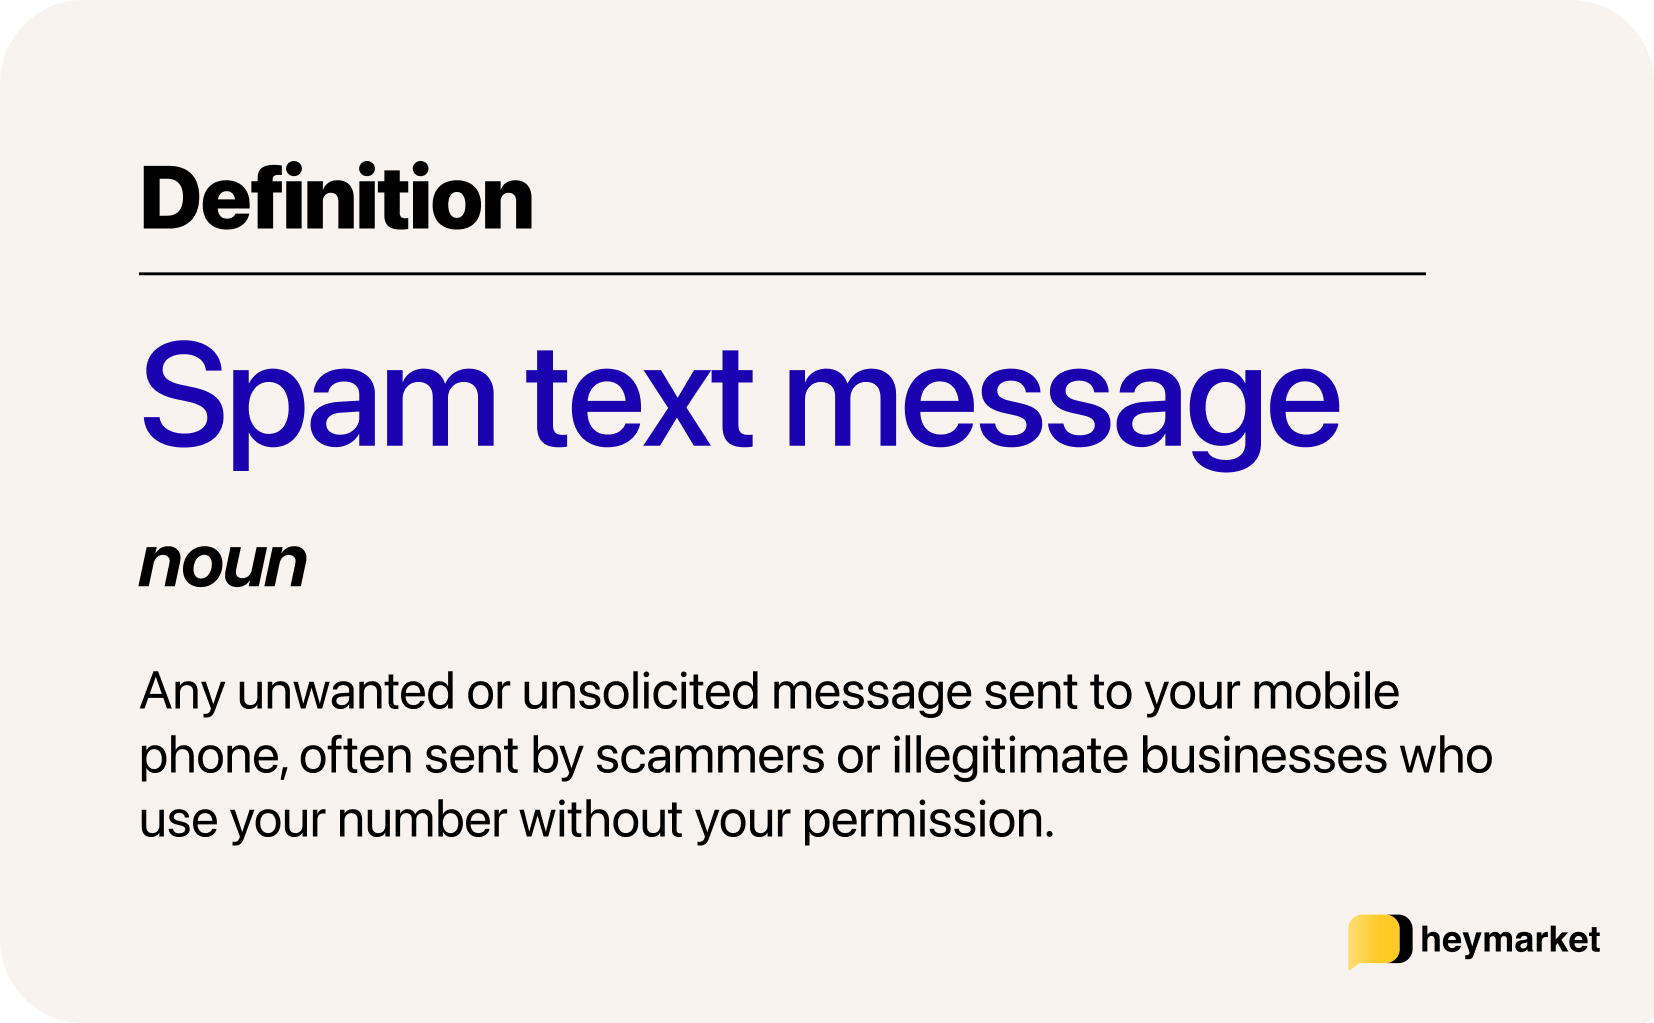 Definition of spam text message: Any unwanted or unsolicited message sent to your mobile phone, often sent by scammers or illegitimate businesses who use your number without your permission.